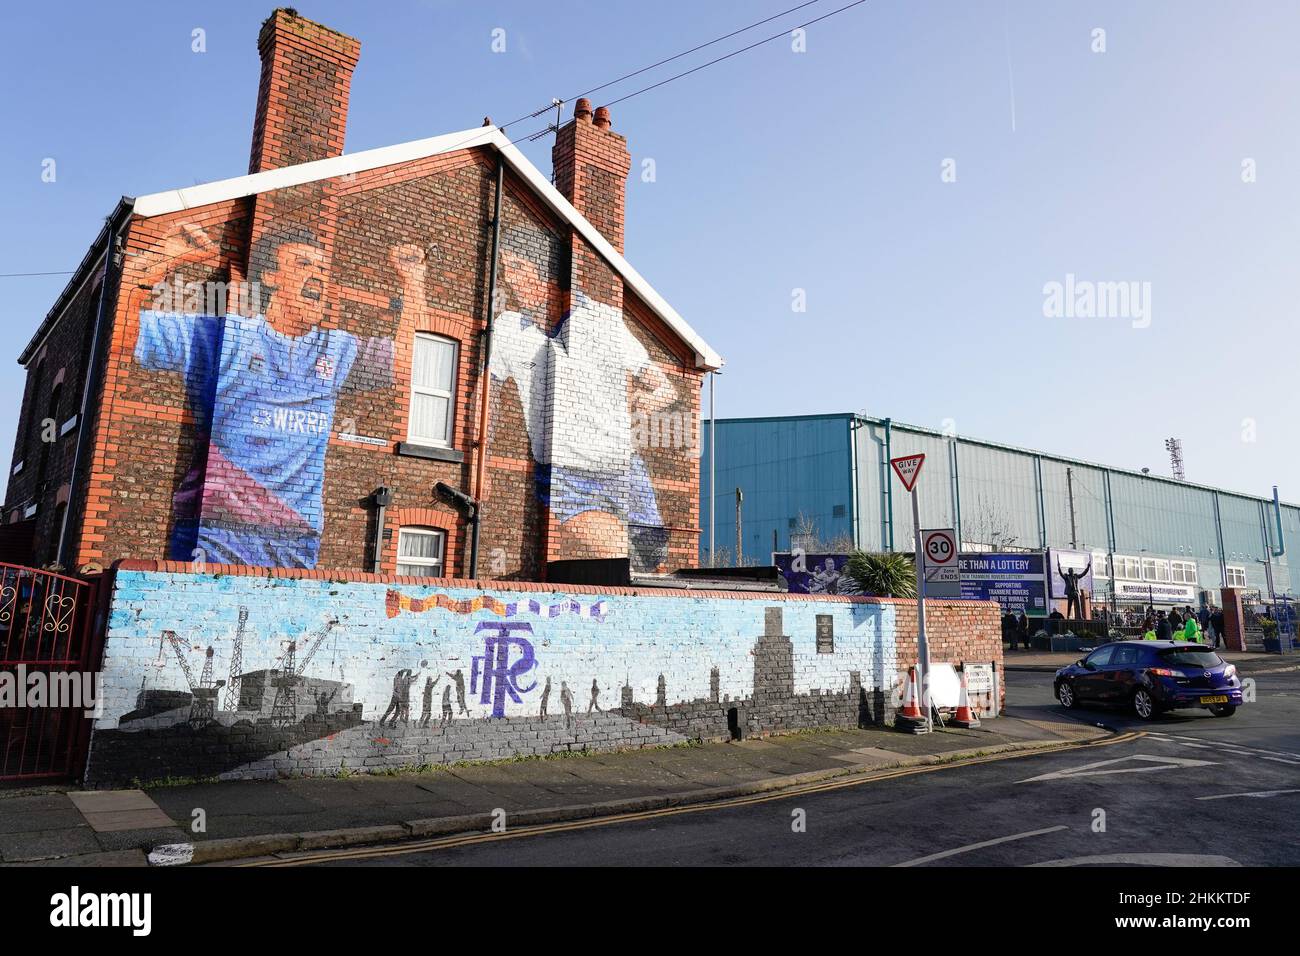 General view of a mural outside Prenton Park Stadium before the gamePicture by Steve Flynn/AHPIX.com, Football: The SkyBet League 2 match Tranmere Rov Stock Photo